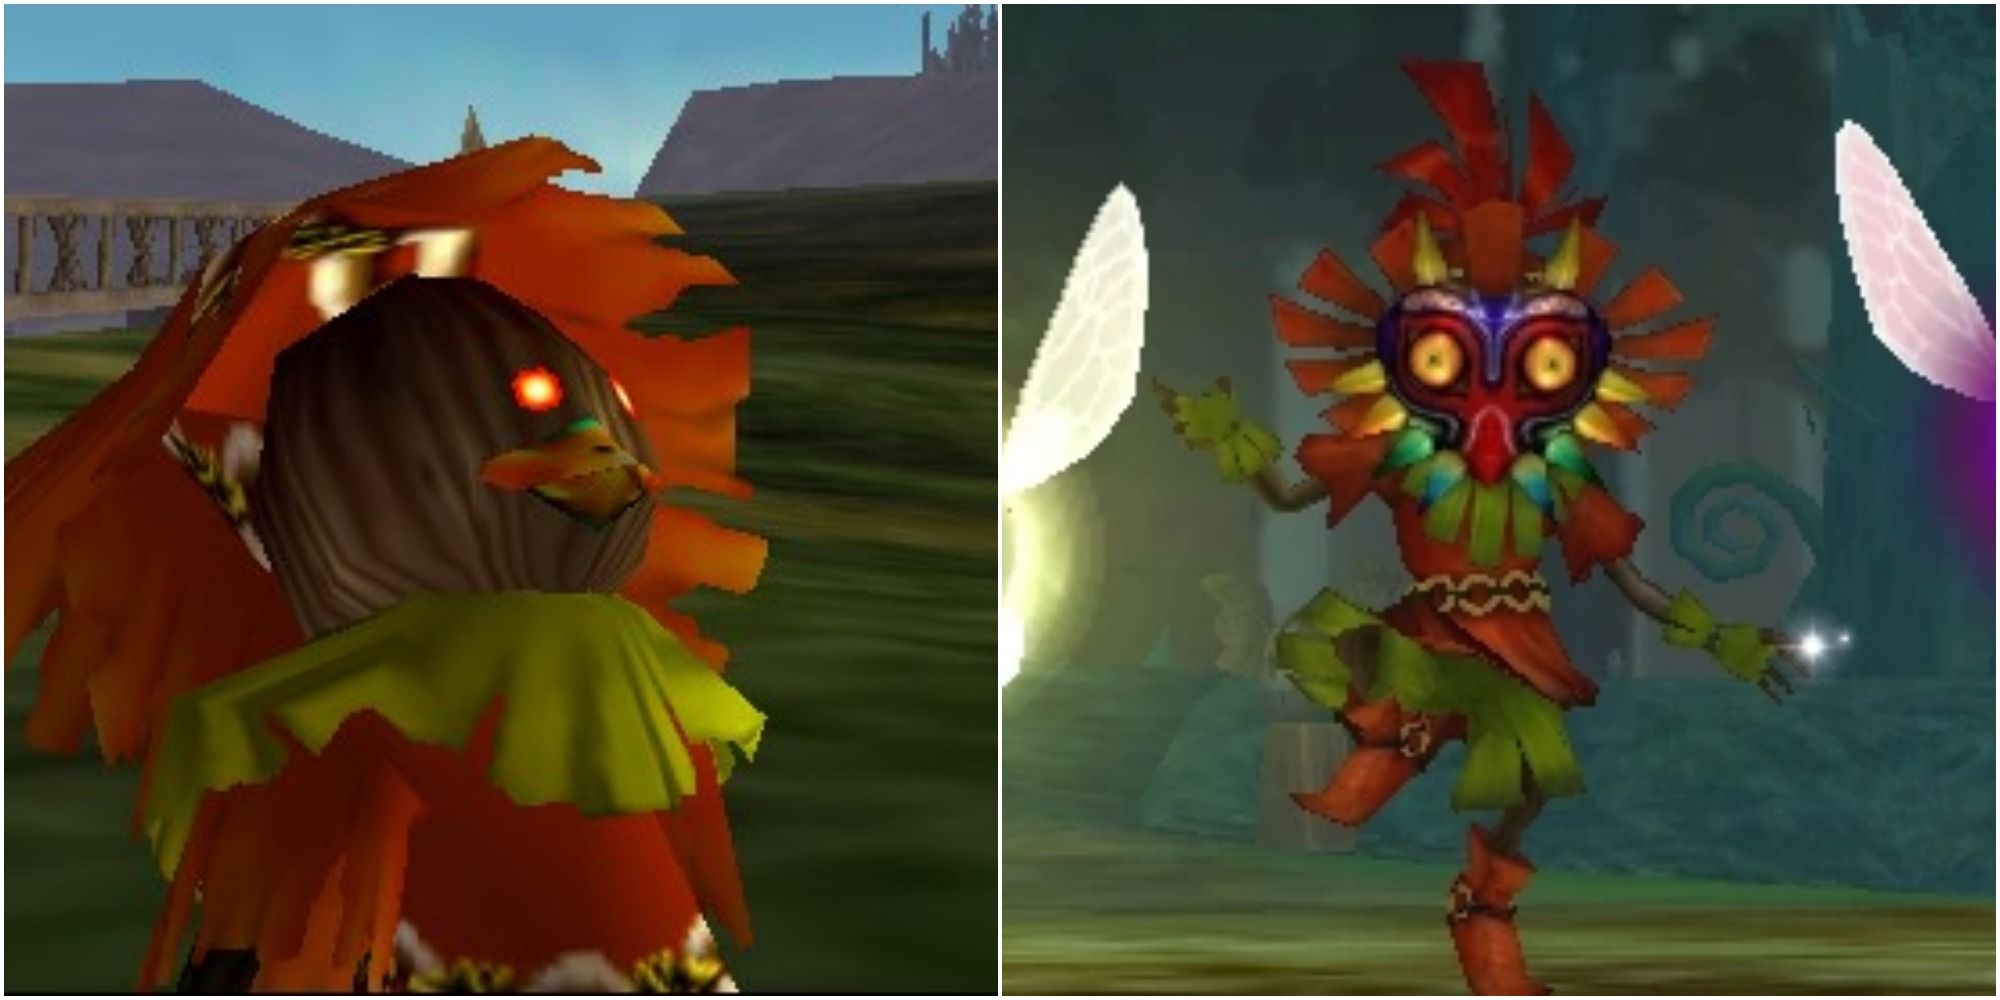 Is The Skull In Ocarina Of Time Same One From Majora's